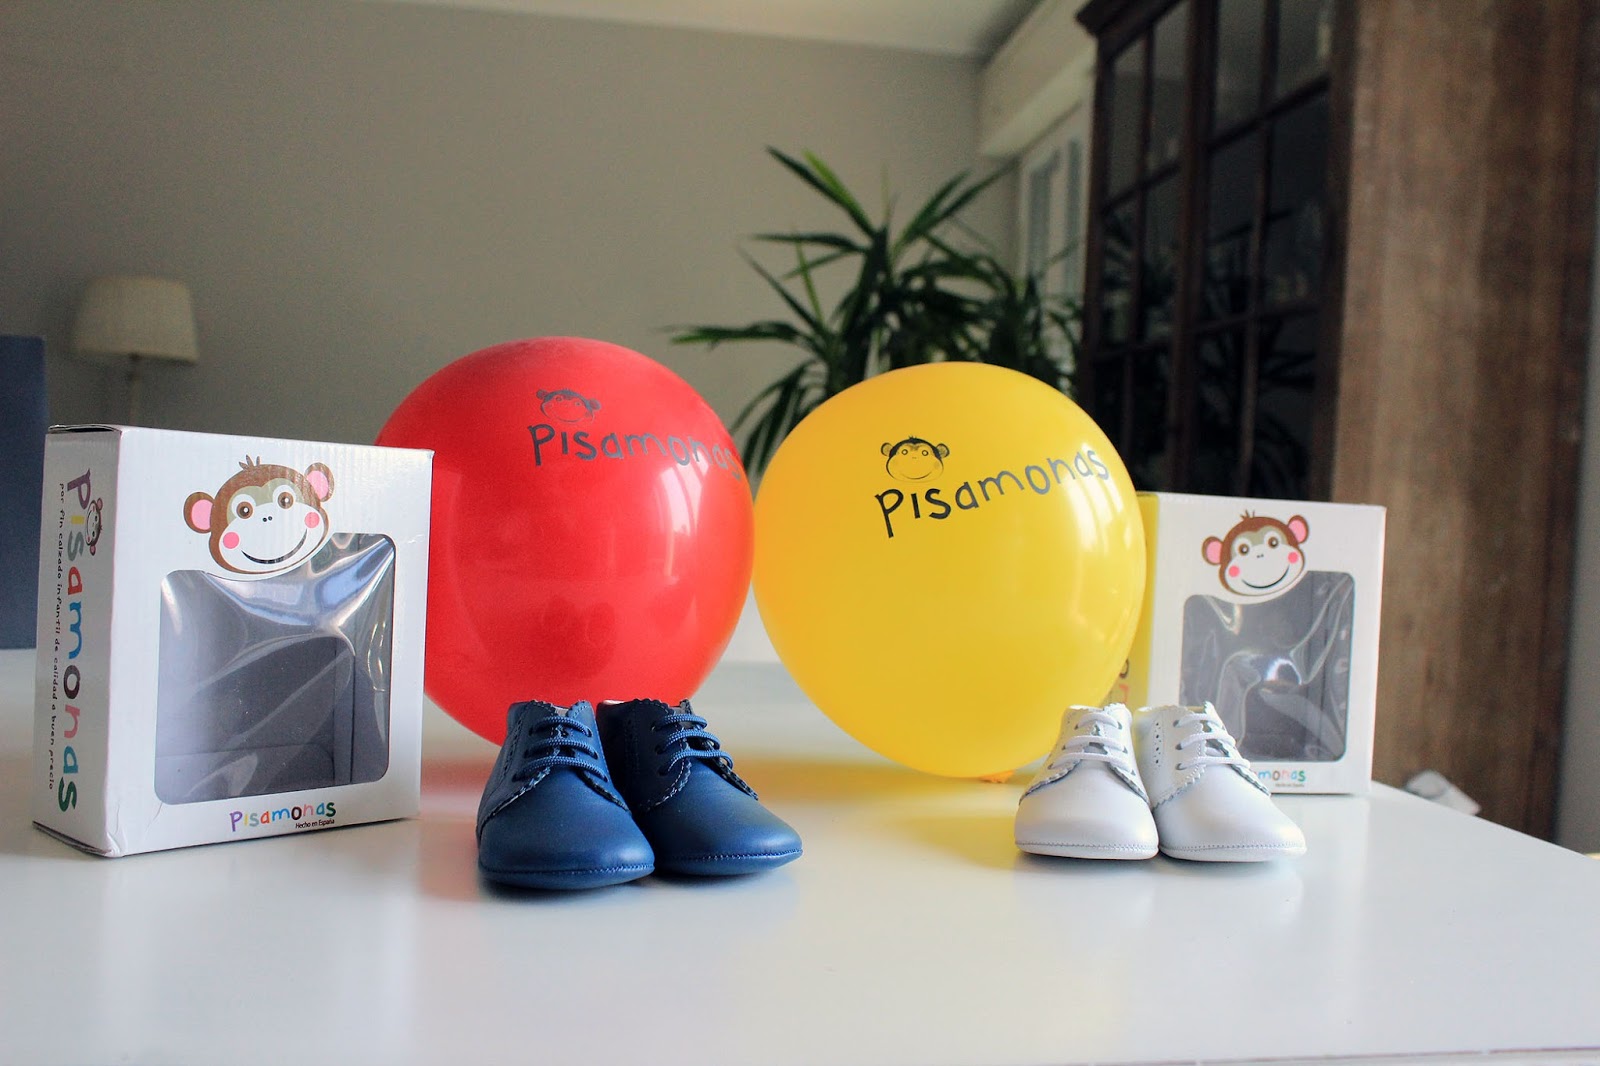 Eniwhere Fashion - Pisamonas kids shoes - Made in Spain